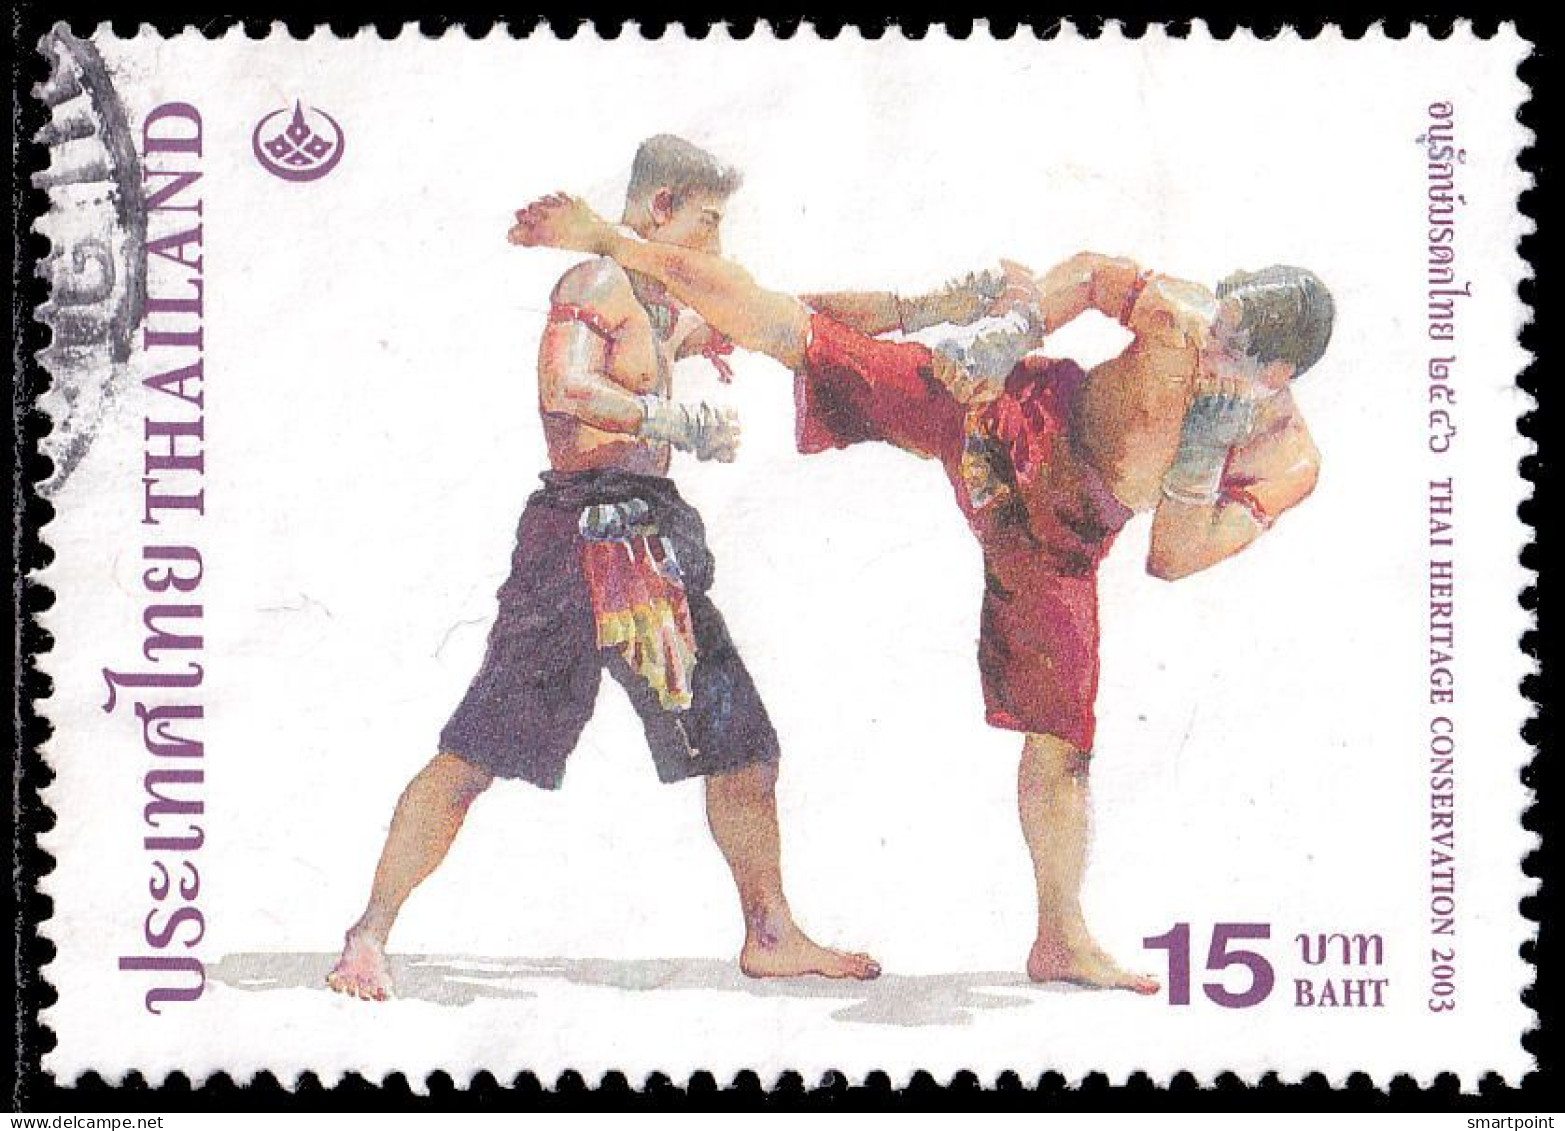 Thailand Stamp 2003 Thai Heritage Conservation (16th Series) 15 Baht - Used - Thailand